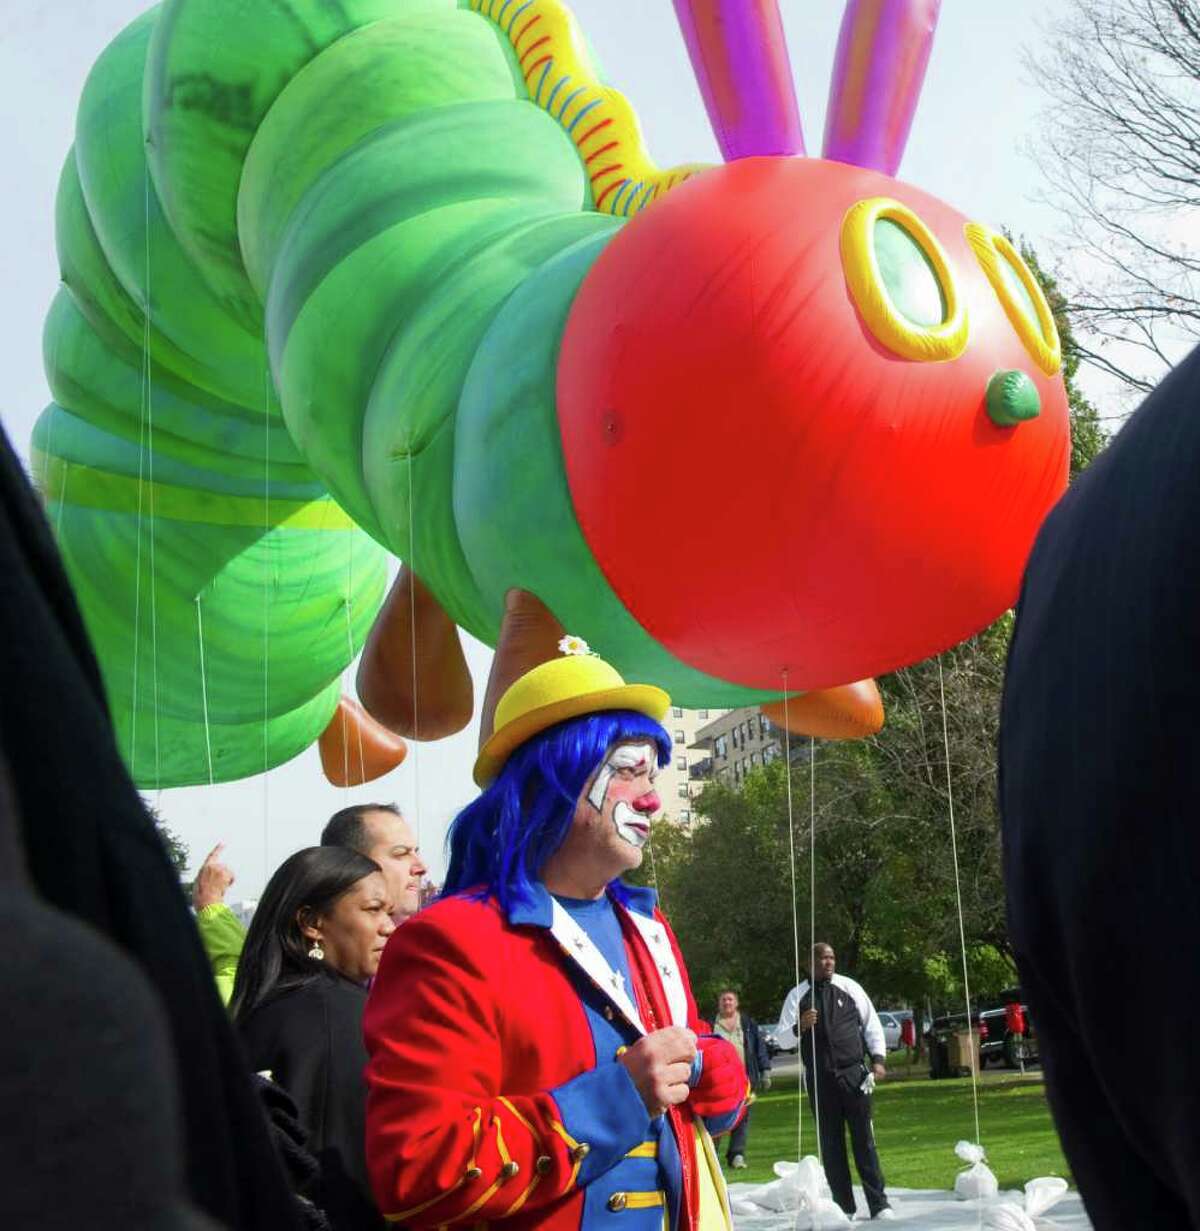 Charles Pia dons a clown suit as the 2011 UBS Parade Spectacular kicks off with a balloon training session featuring "The Very Hungry Caterpillar" at Latham Park in Stamford, Conn., November 3, 2011. The parade is set for Sunday, November 20, 2011. Laura Linney and the cast of the "The Big C," which is filmed in Stamford, will serve as Grand Marshals. Pia's first outing as a clown was 35 years ago during the first balloon parade, he then retired his suit until last year when his clown returned.